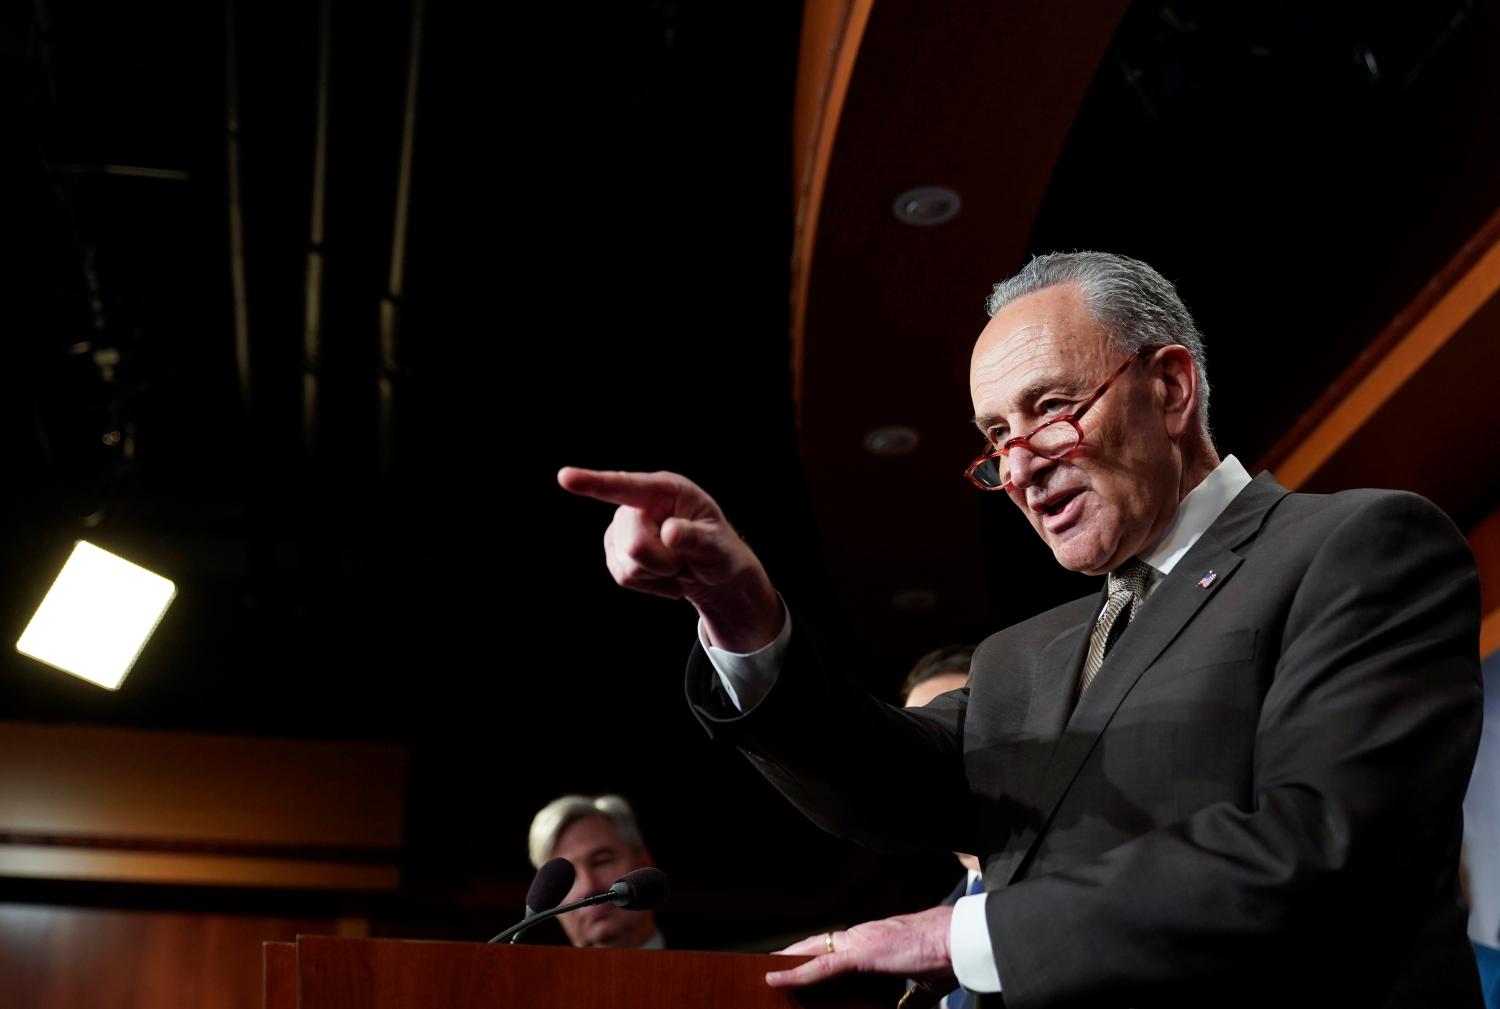 U.S. Senate Minority Leader Chuck Schumer (D-NY) speaks about the formation of the Senate Democrats' Special Committee on Climate Change on Capitol Hill in Washington, D.C., U.S., March 27, 2019. REUTERS/Joshua Roberts - RC1E7C265D50